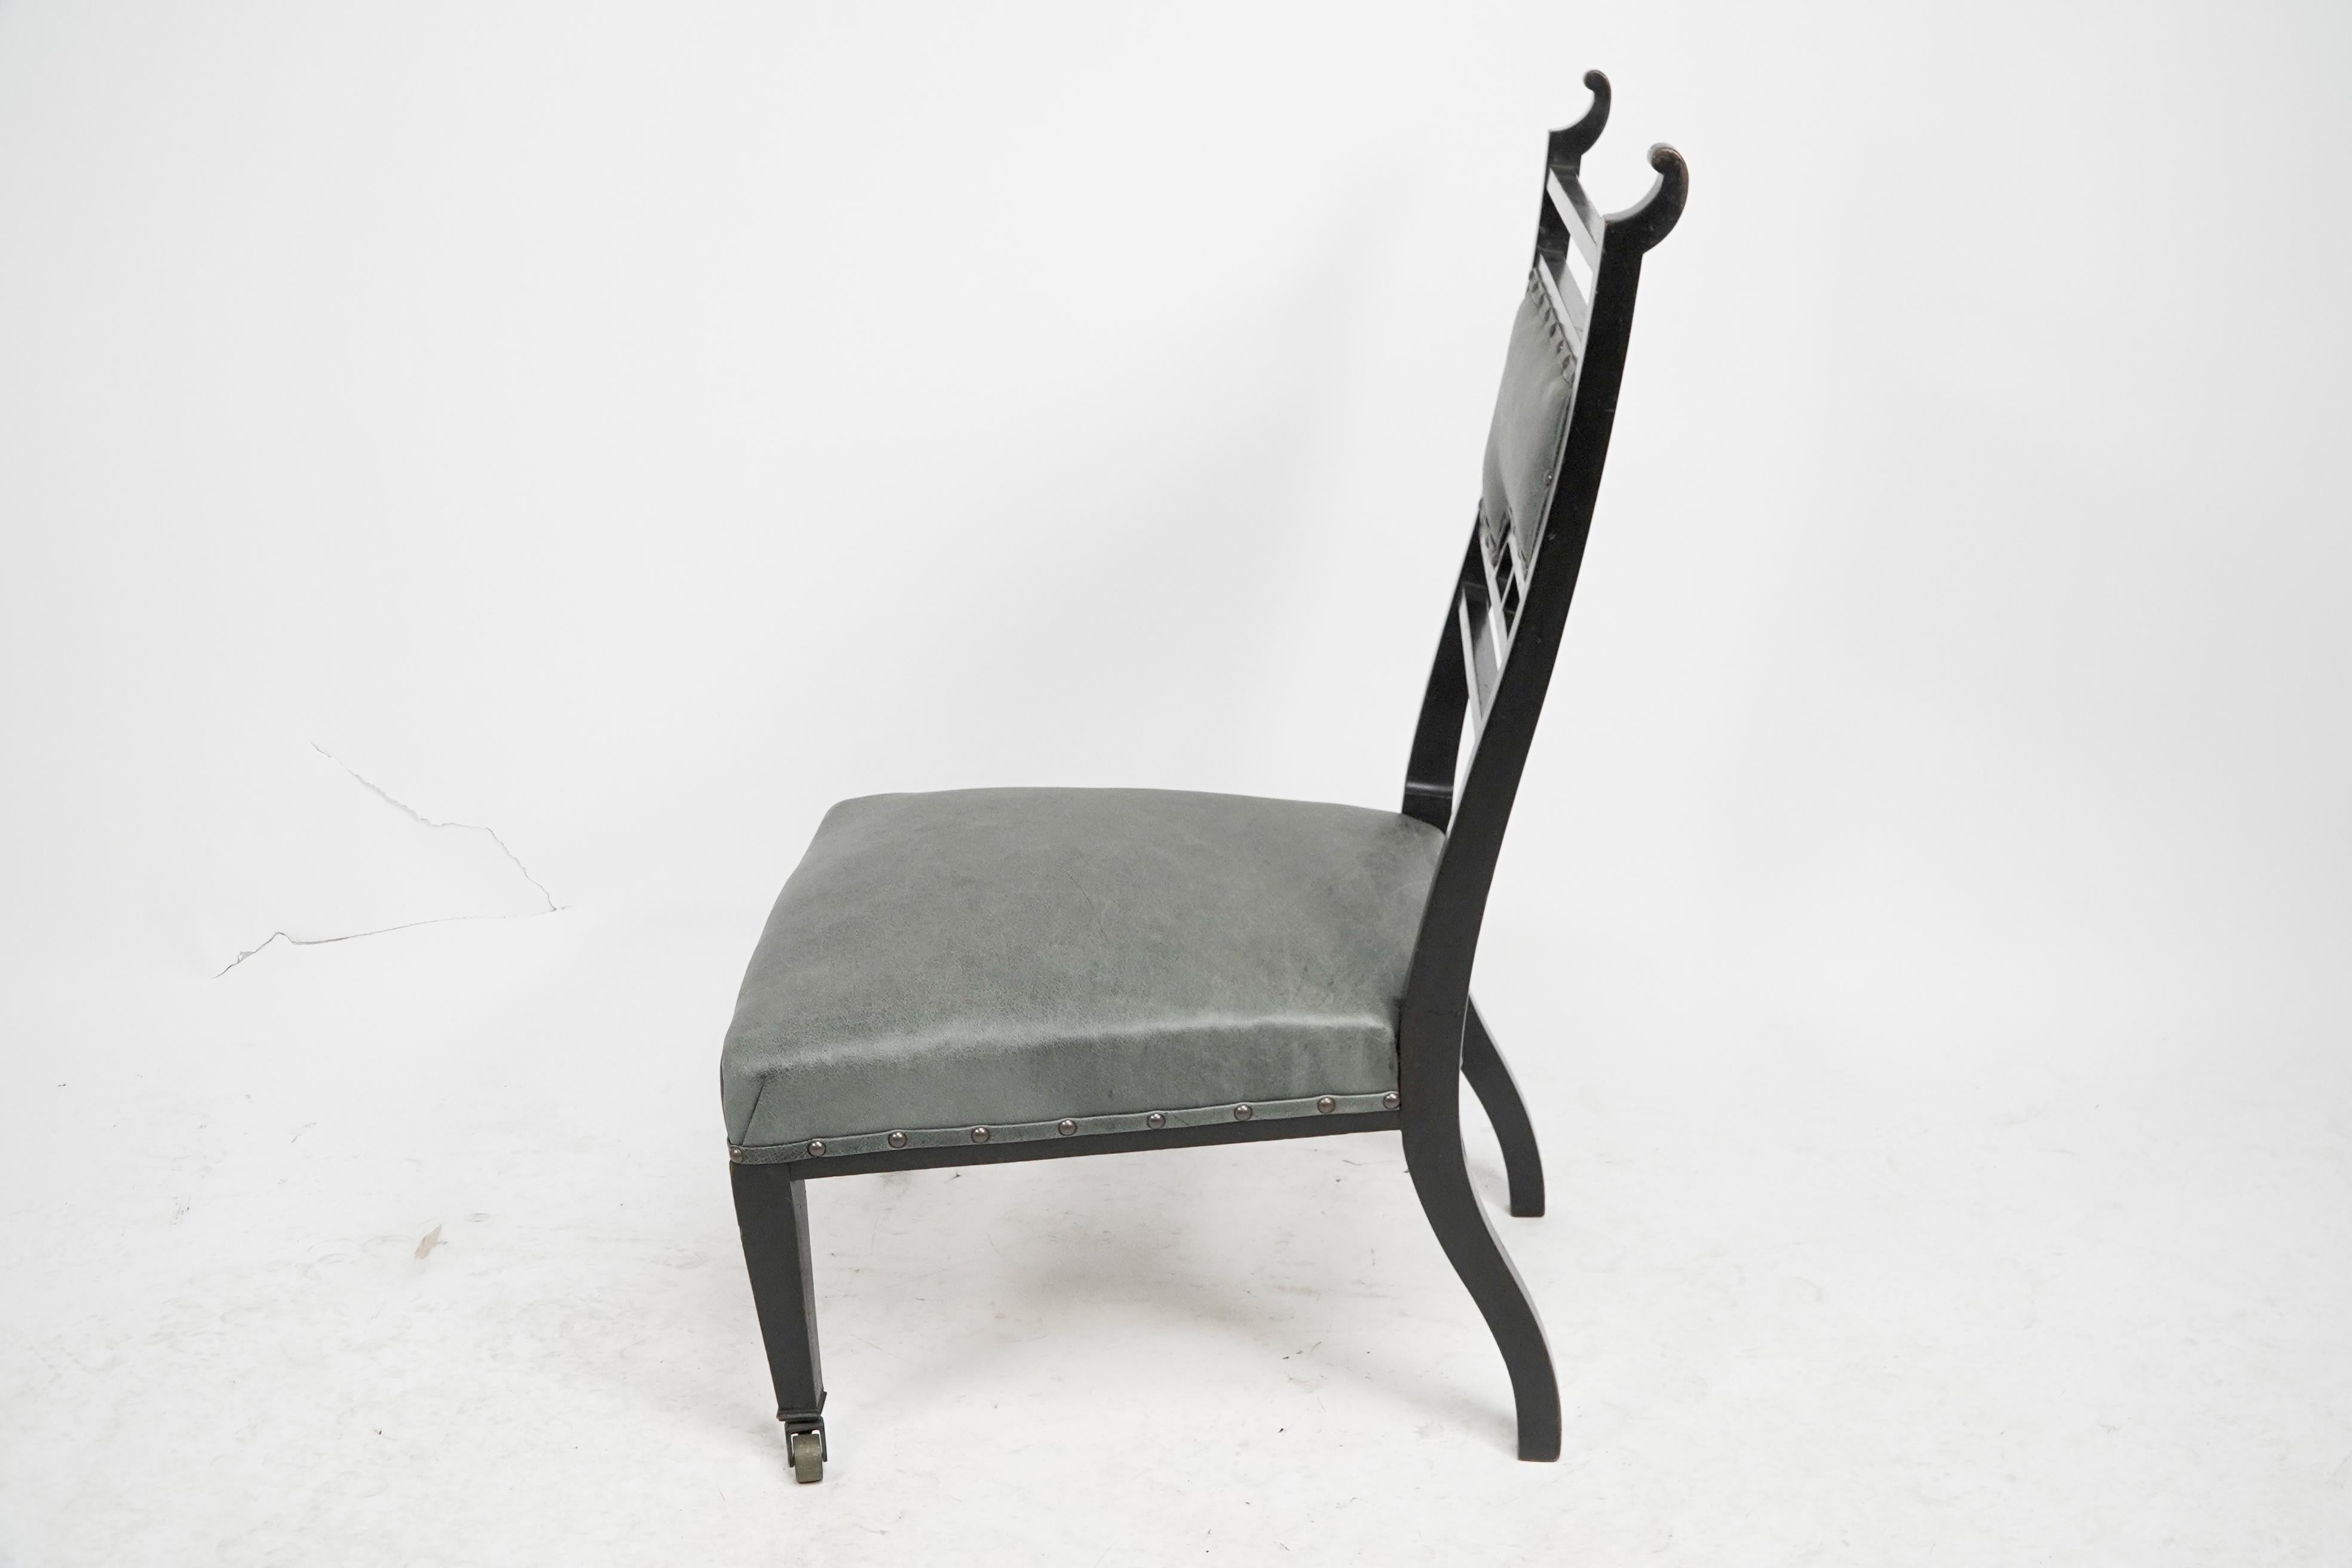 Late 19th Century An Anglo-Japanese ebonized side or nursing chair with green hide upholstery For Sale